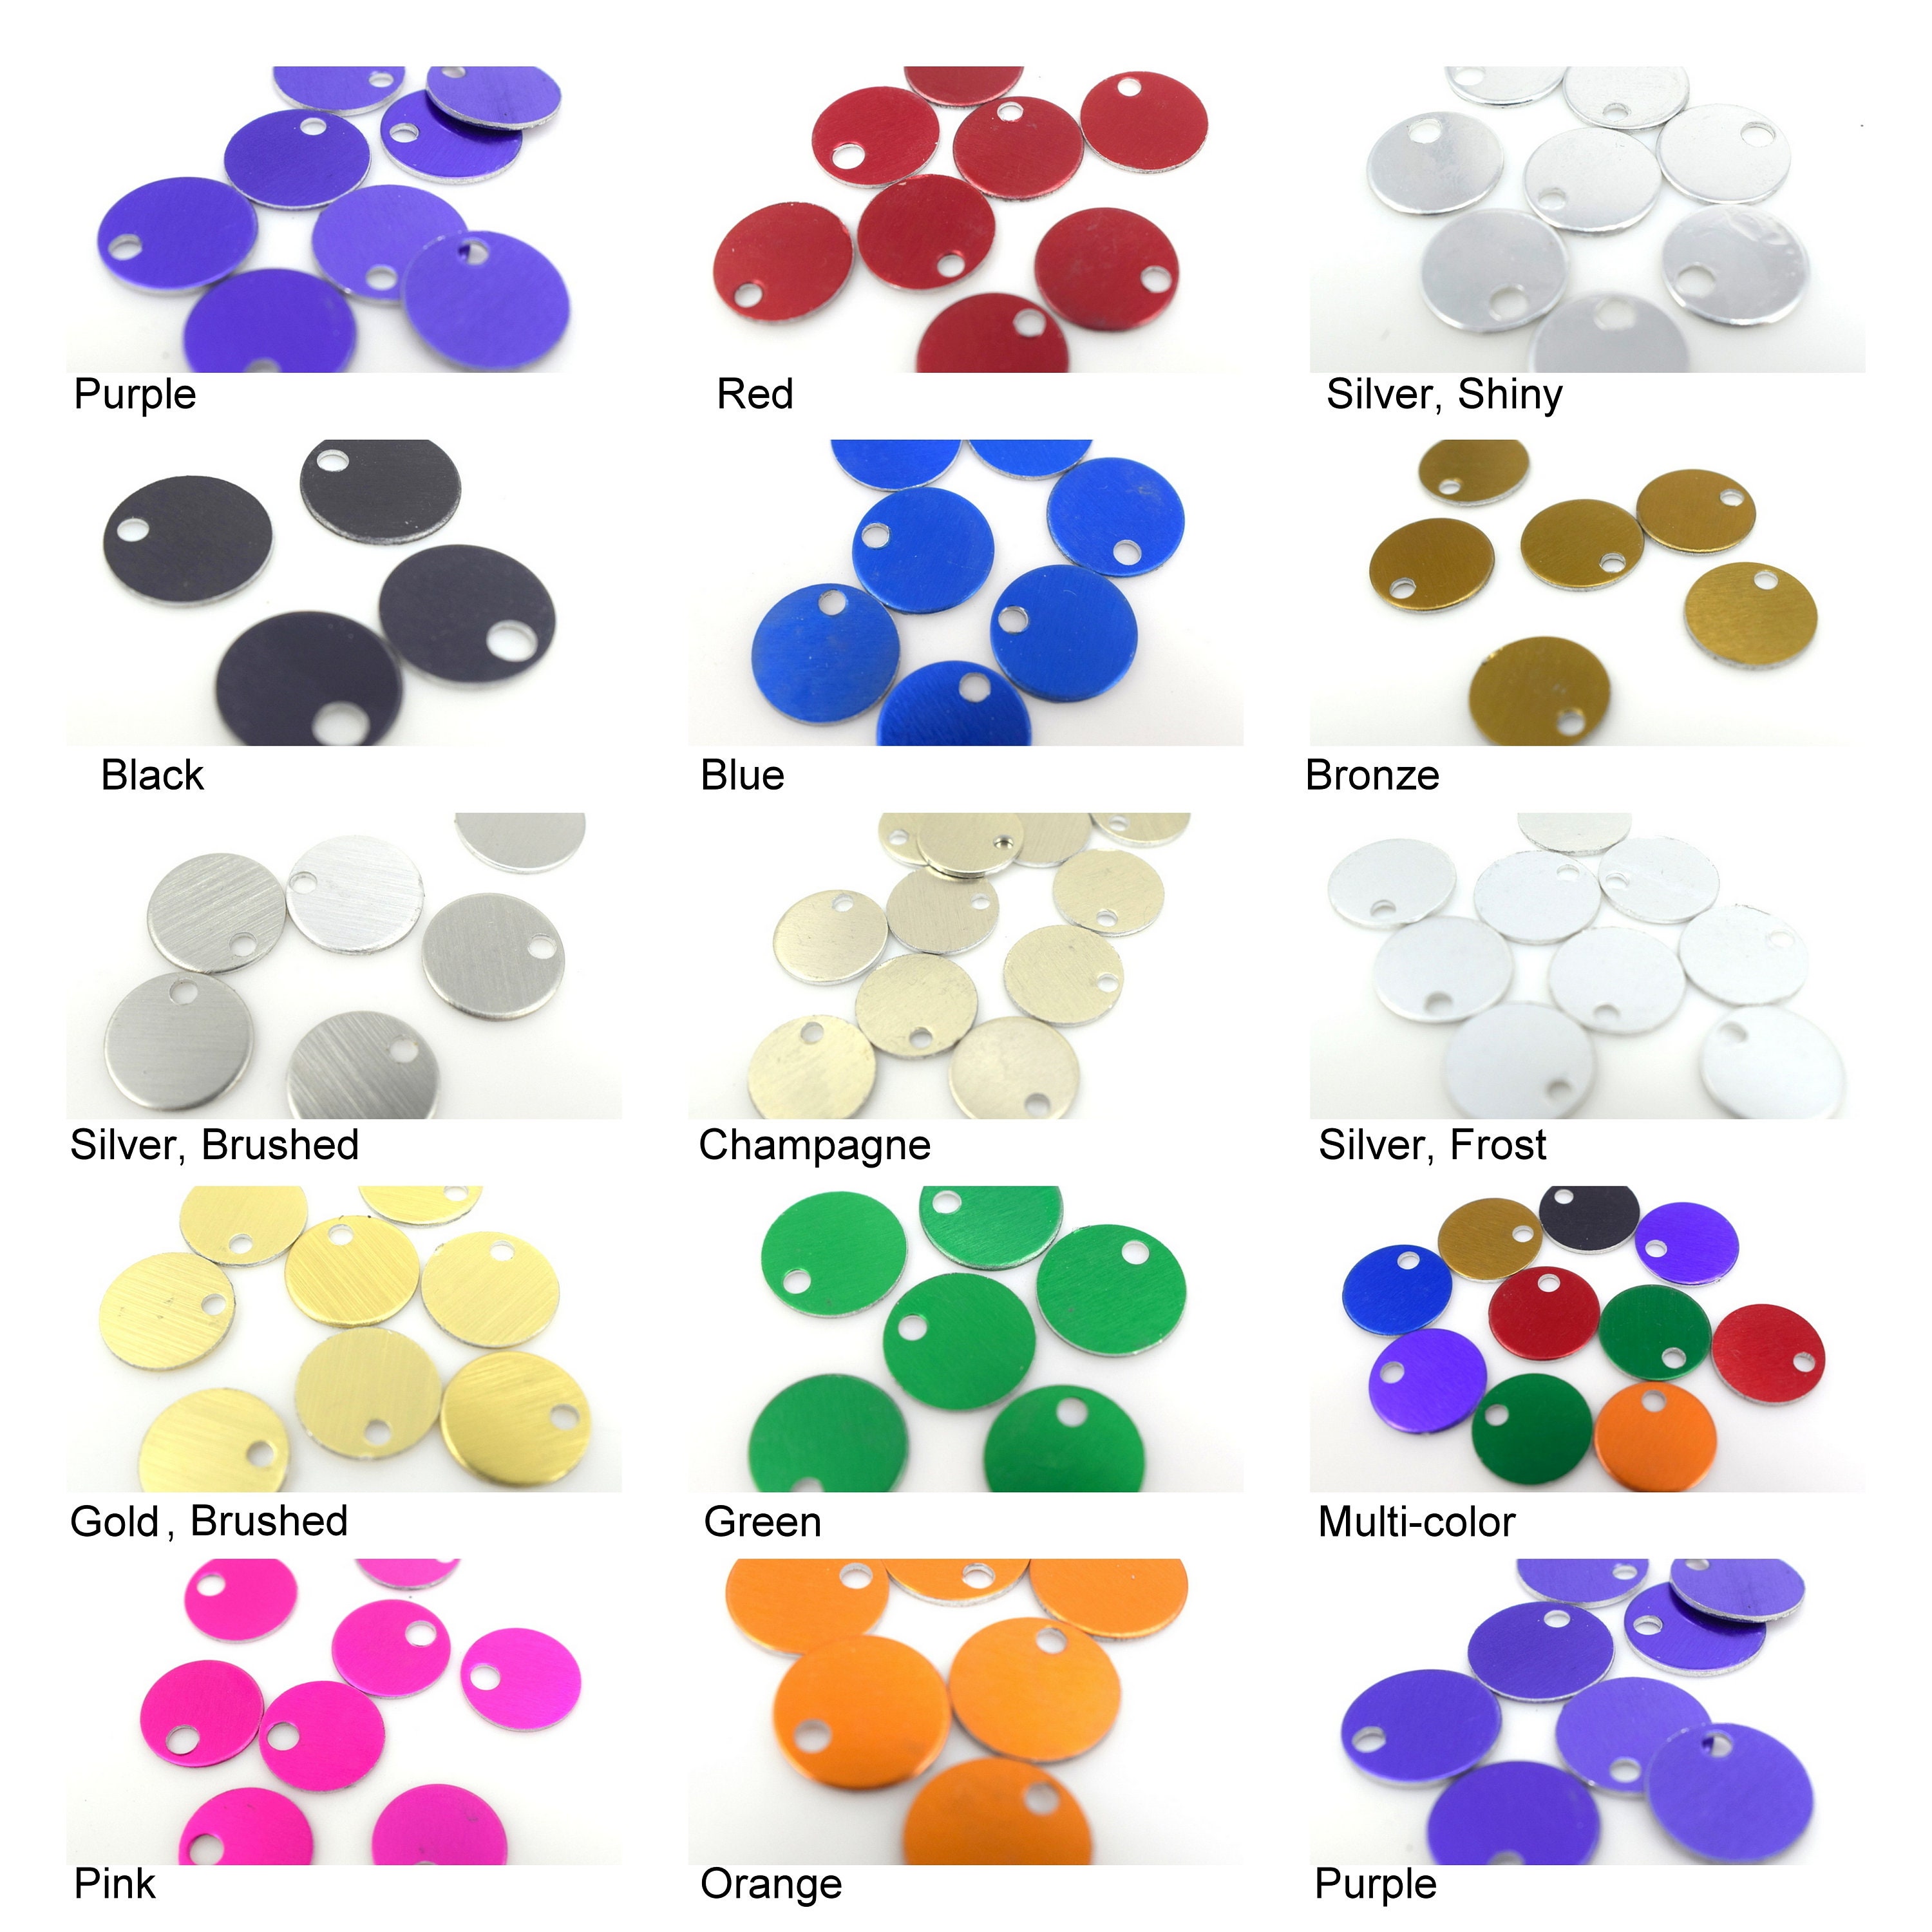 Colorful Round Anodized Aluminum Stamping Blanks Discs 25mm (Pack of 10)  (Color Mix)